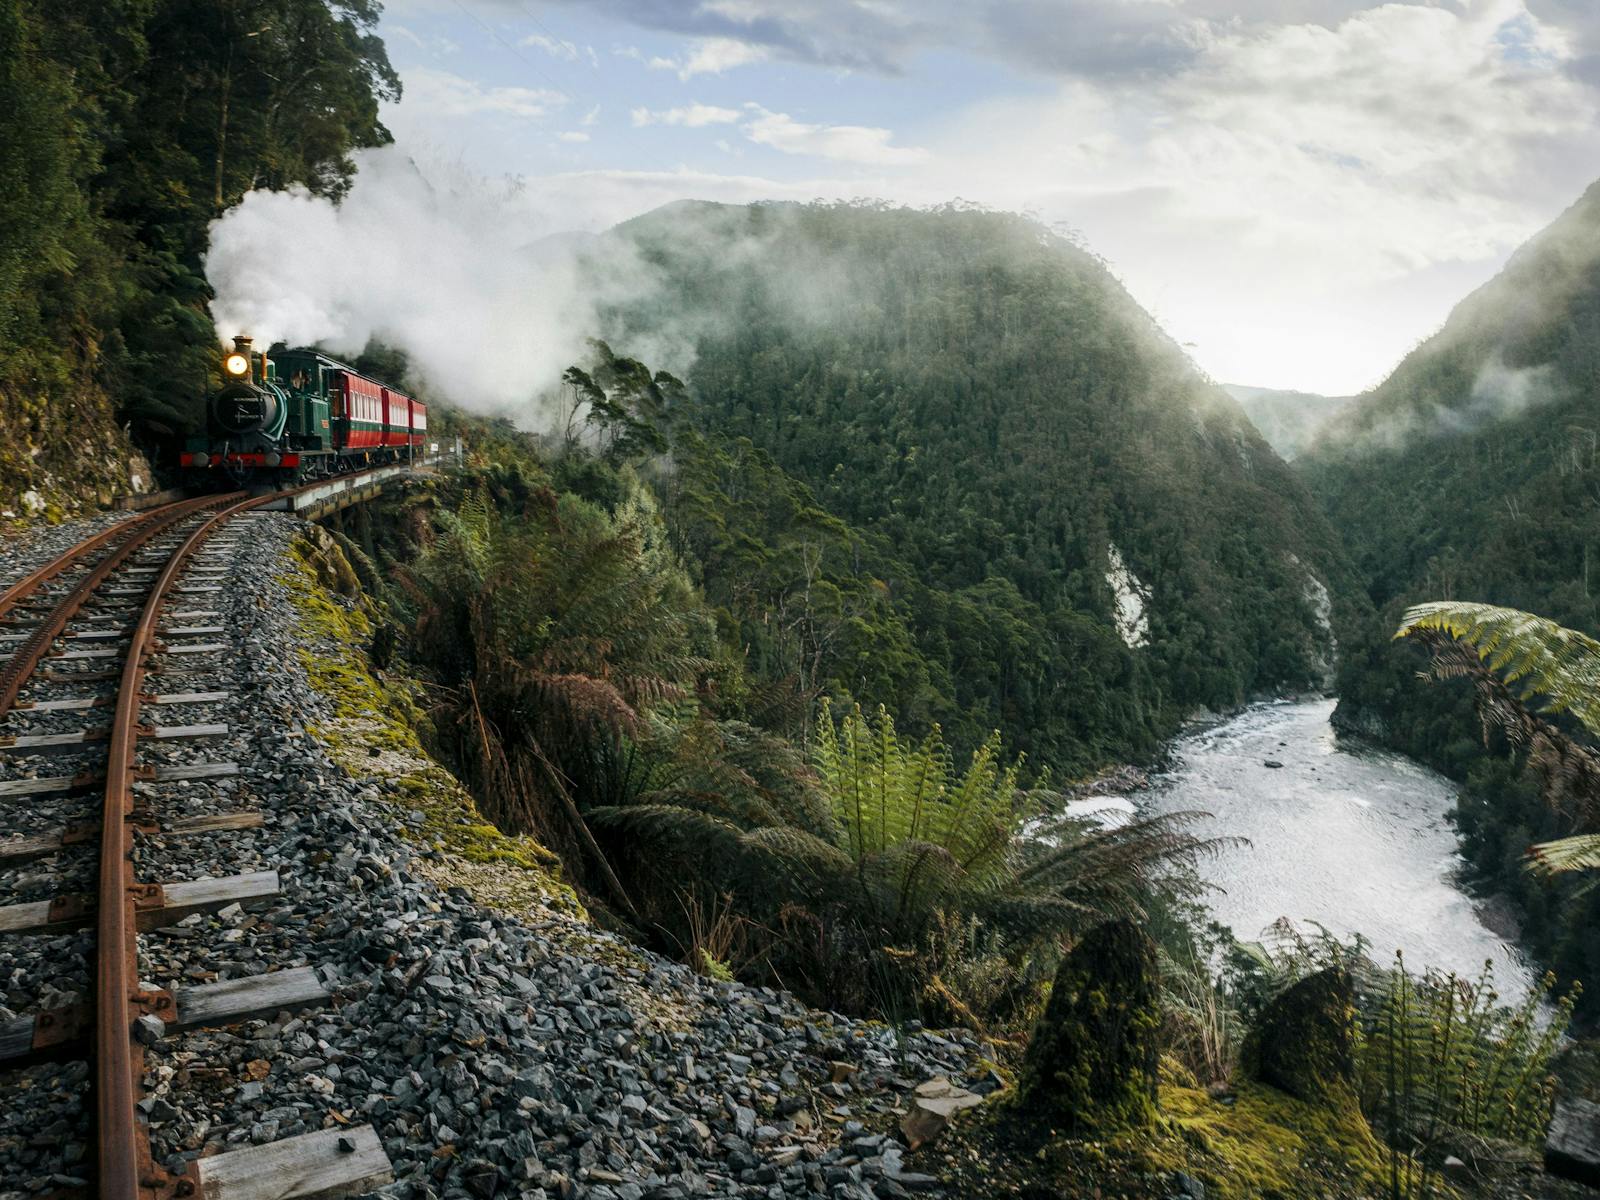 West Coast Wilderness Railway Rack and Gorge experience